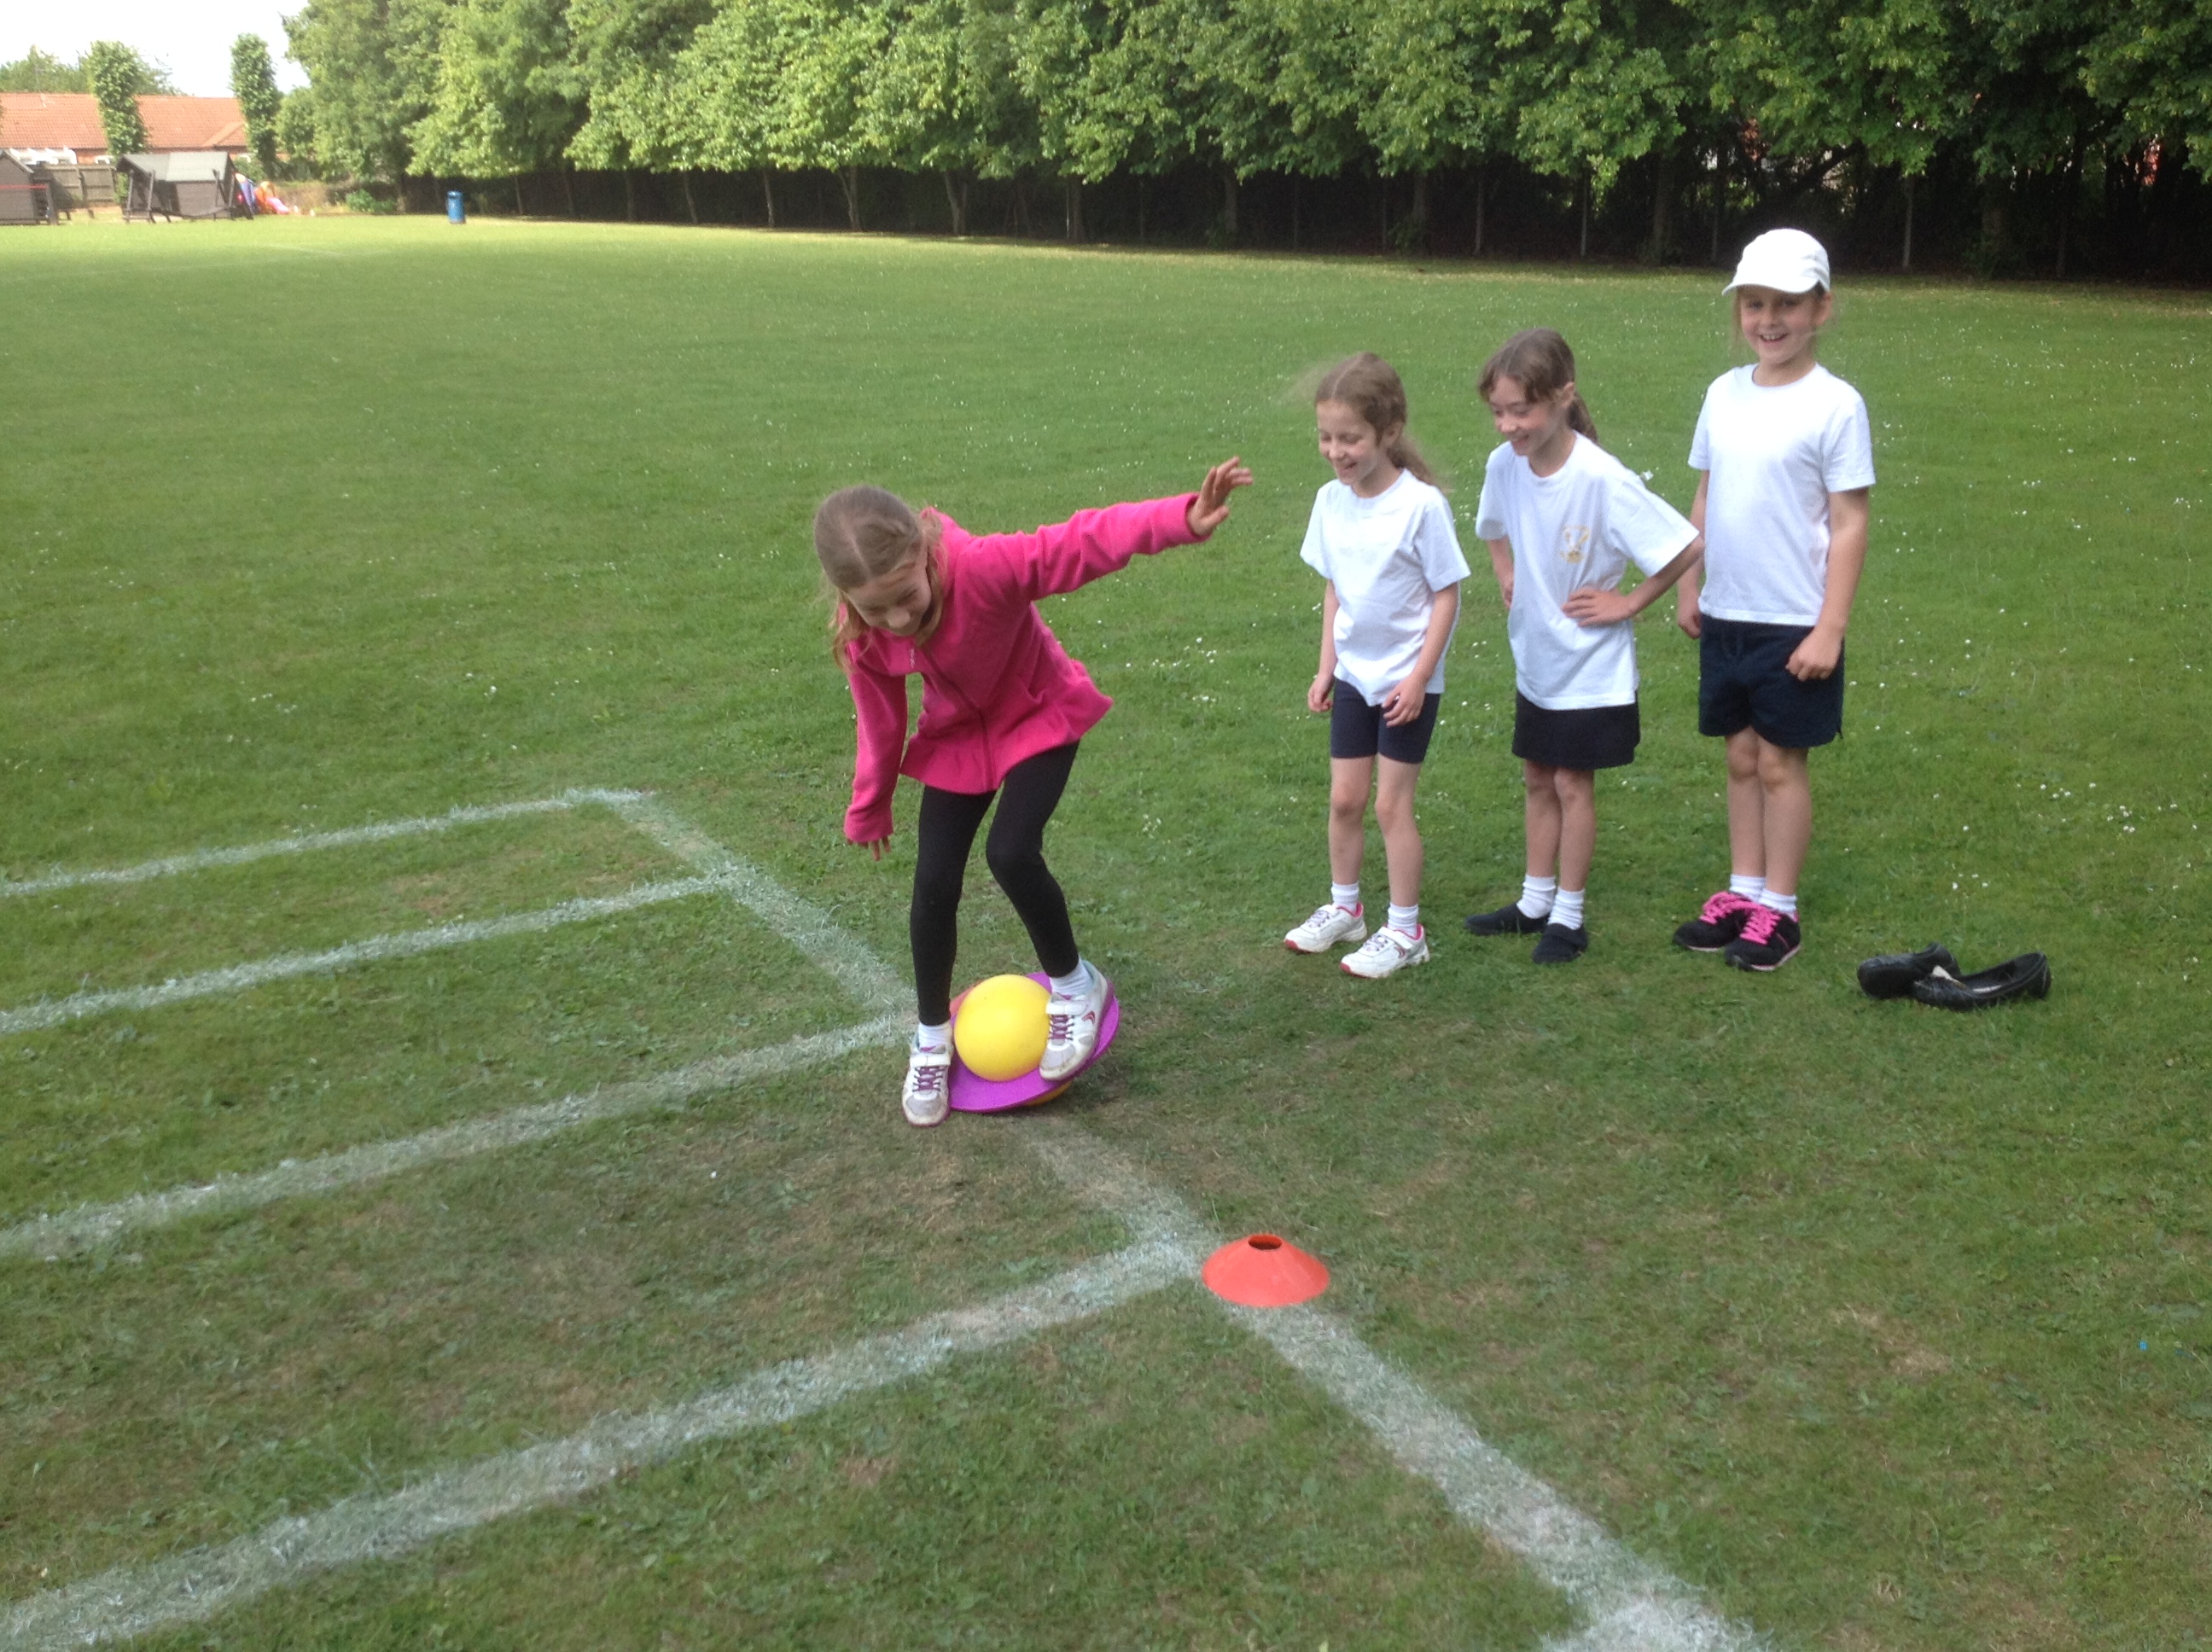 We have loved playing lots of different sports -from a circuit of activities and cricket to street dance.  The football was rained off on Friday but we hope we can play our match this week!